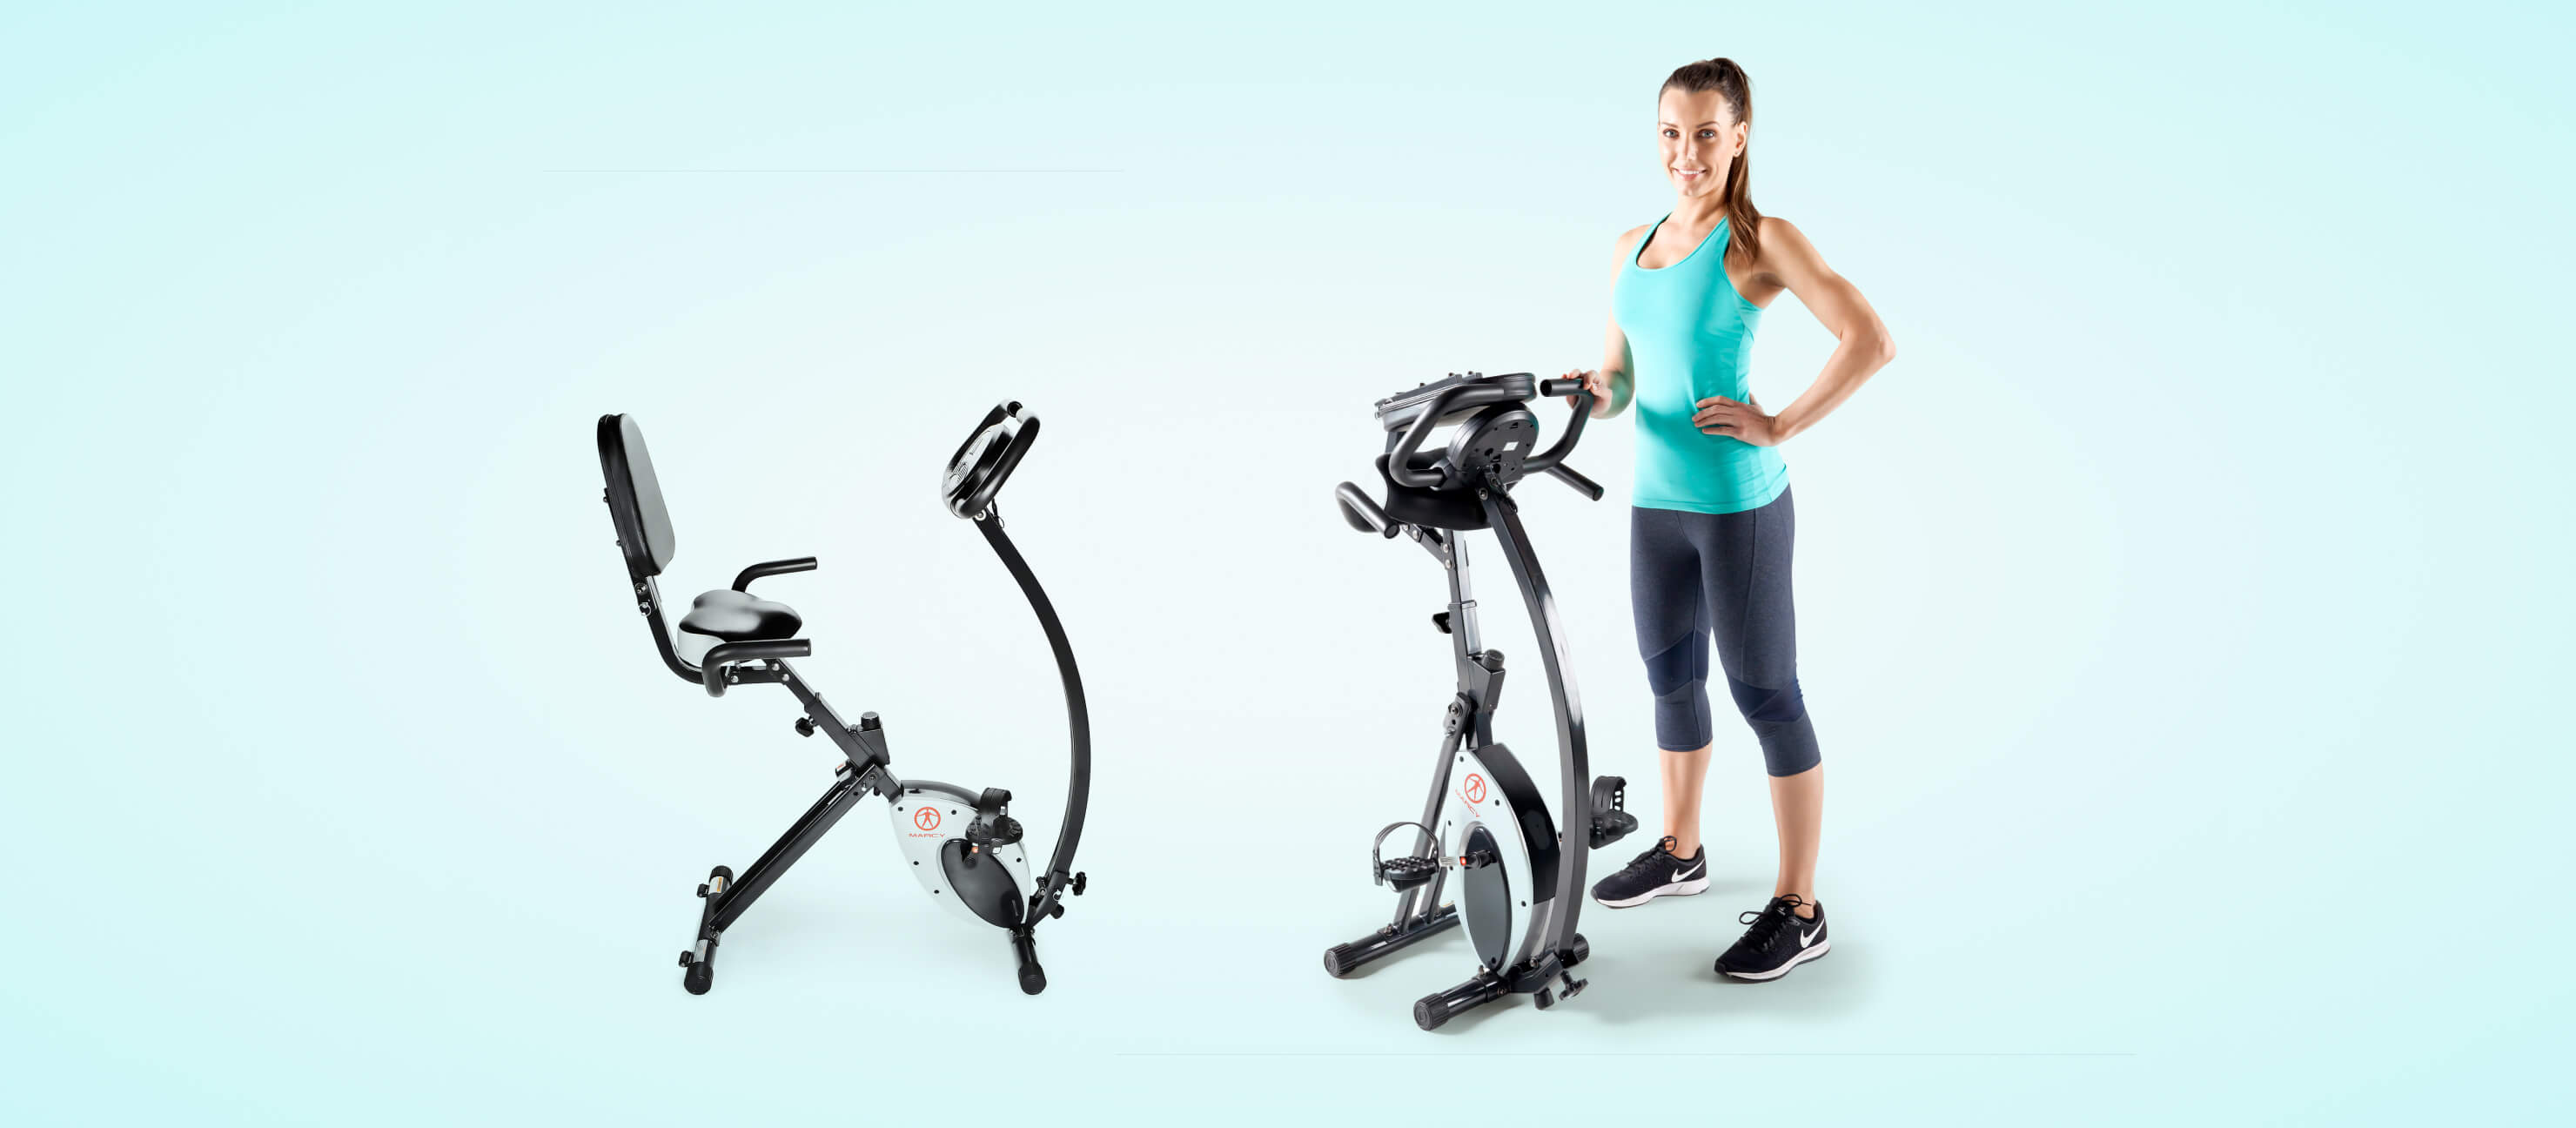 Woman stands next to a foldable exercise bike with her hand on her hips